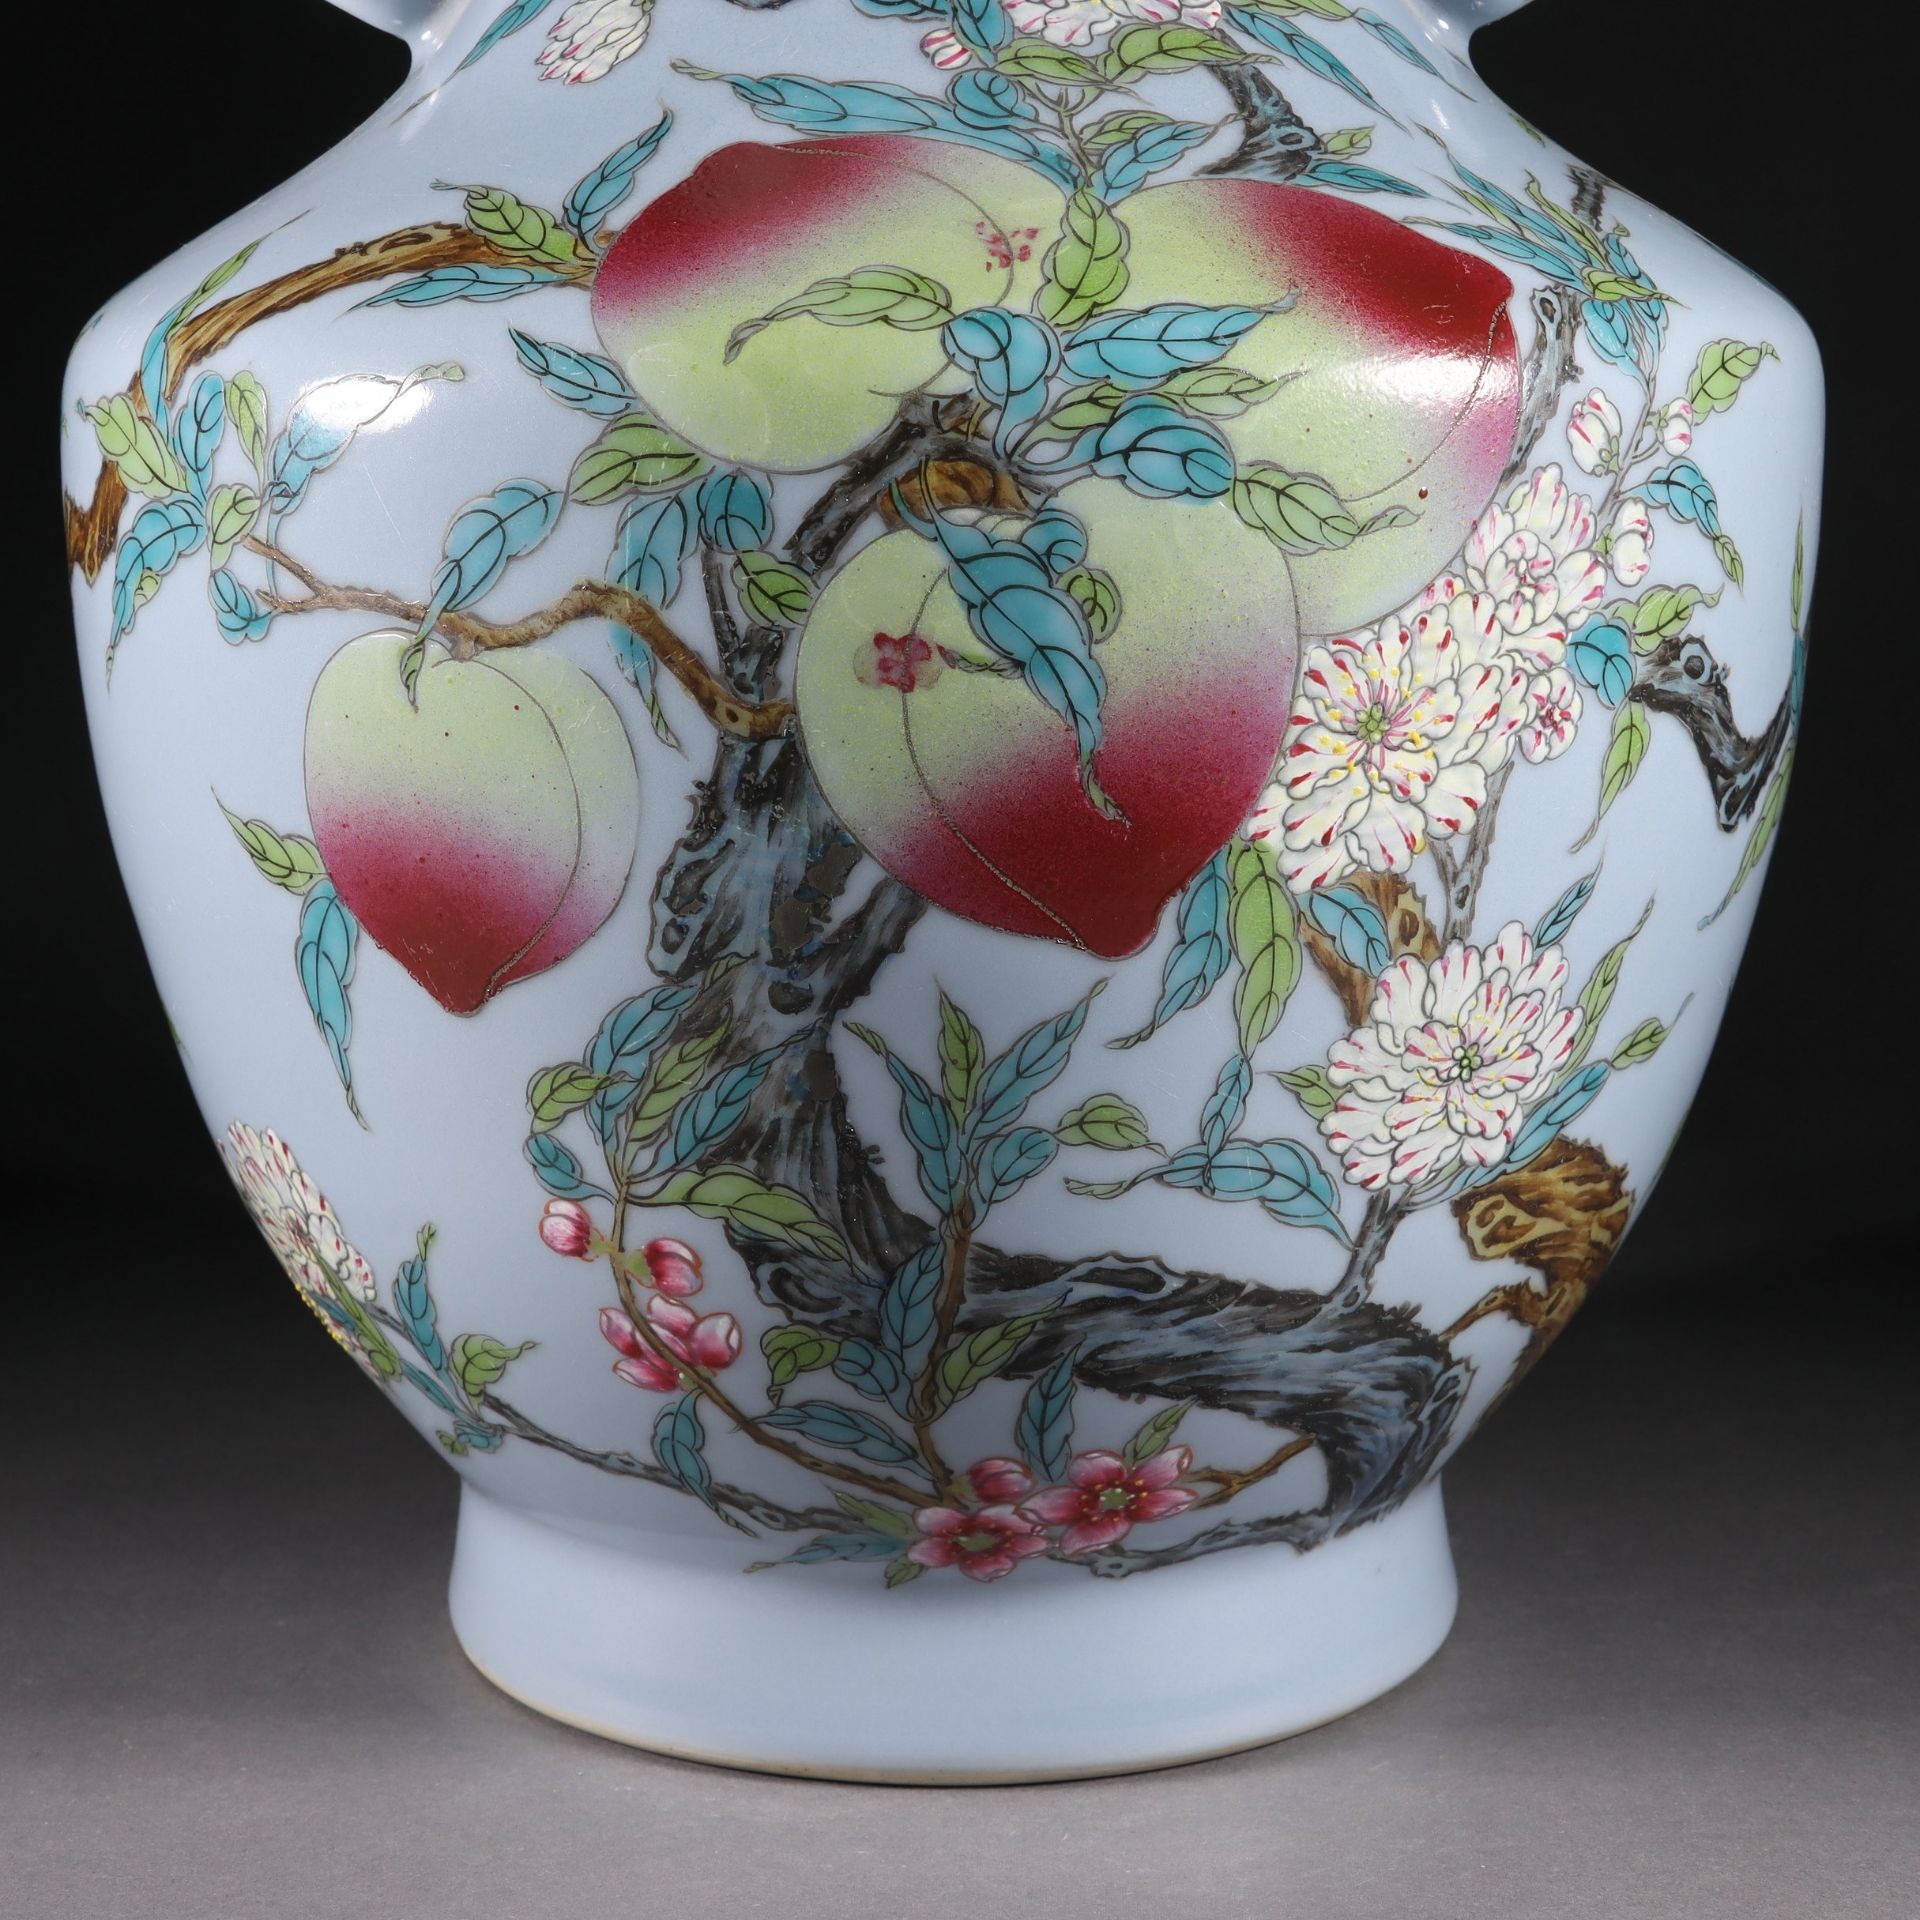 Pastel nine peach amphora from the Qing dynasty - Image 3 of 9